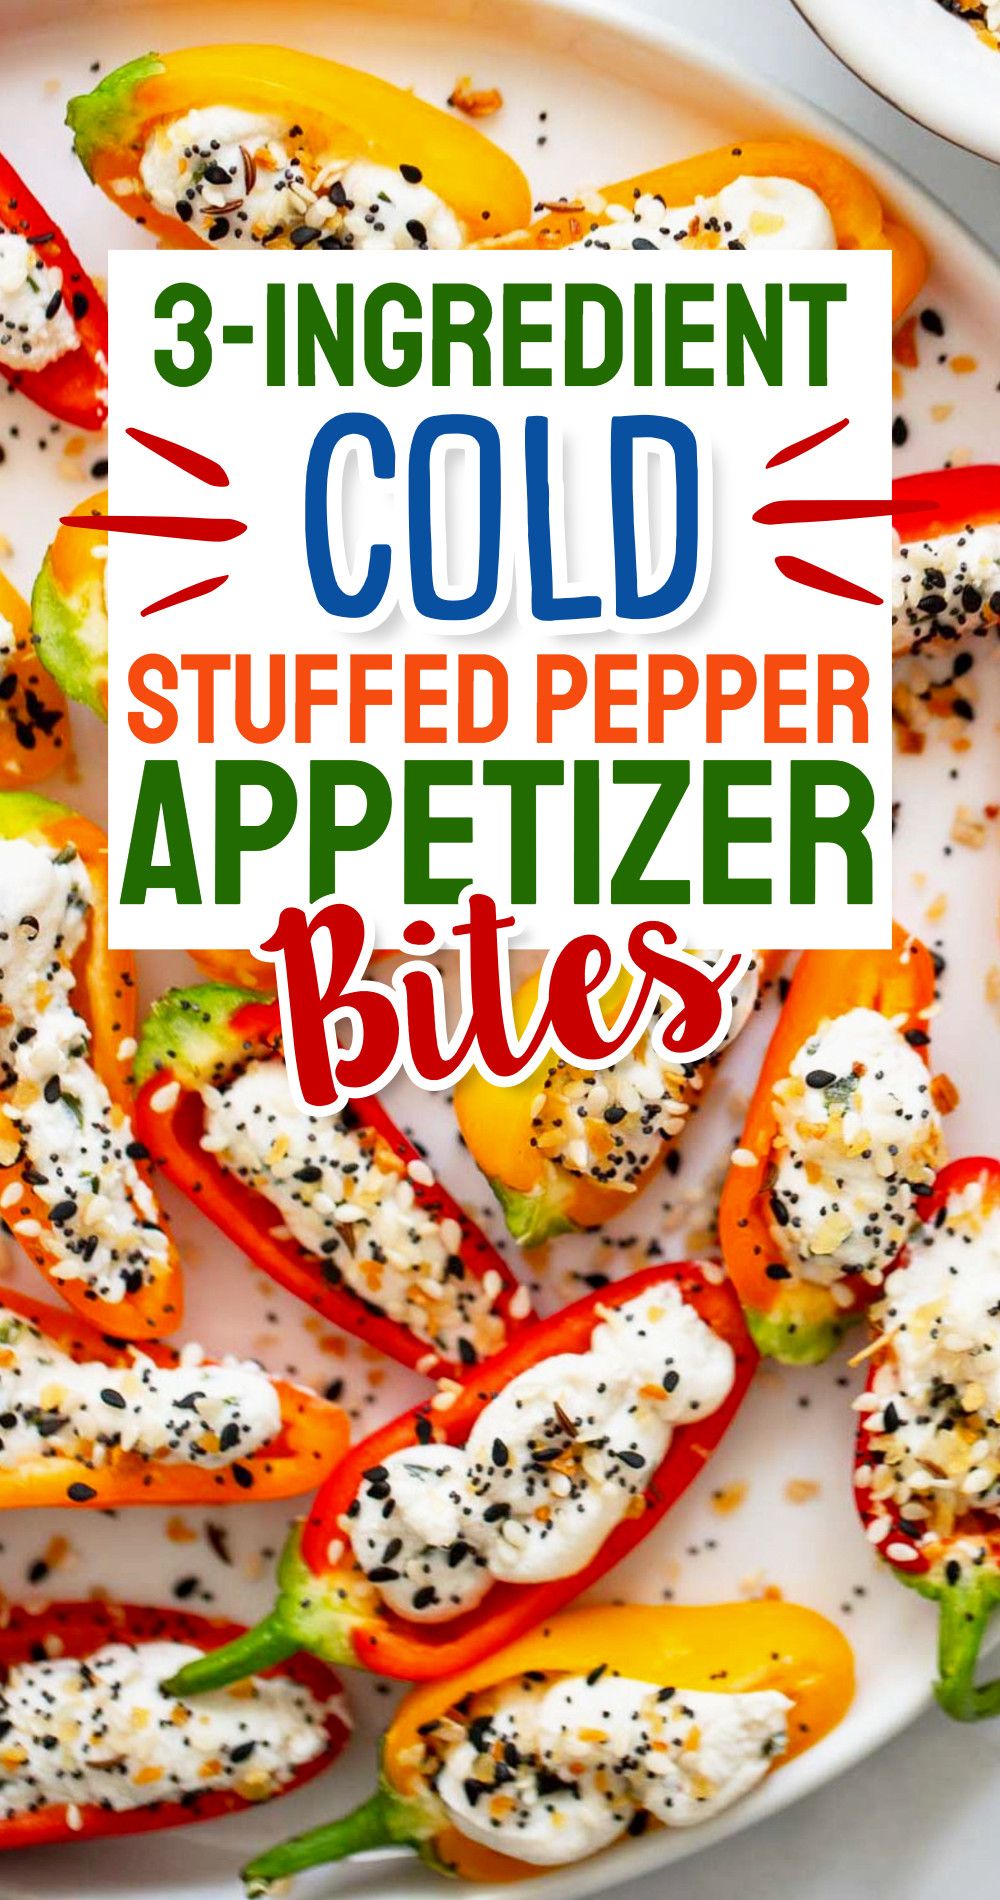 3 ingredient cold stuffed pepper appetizer bites